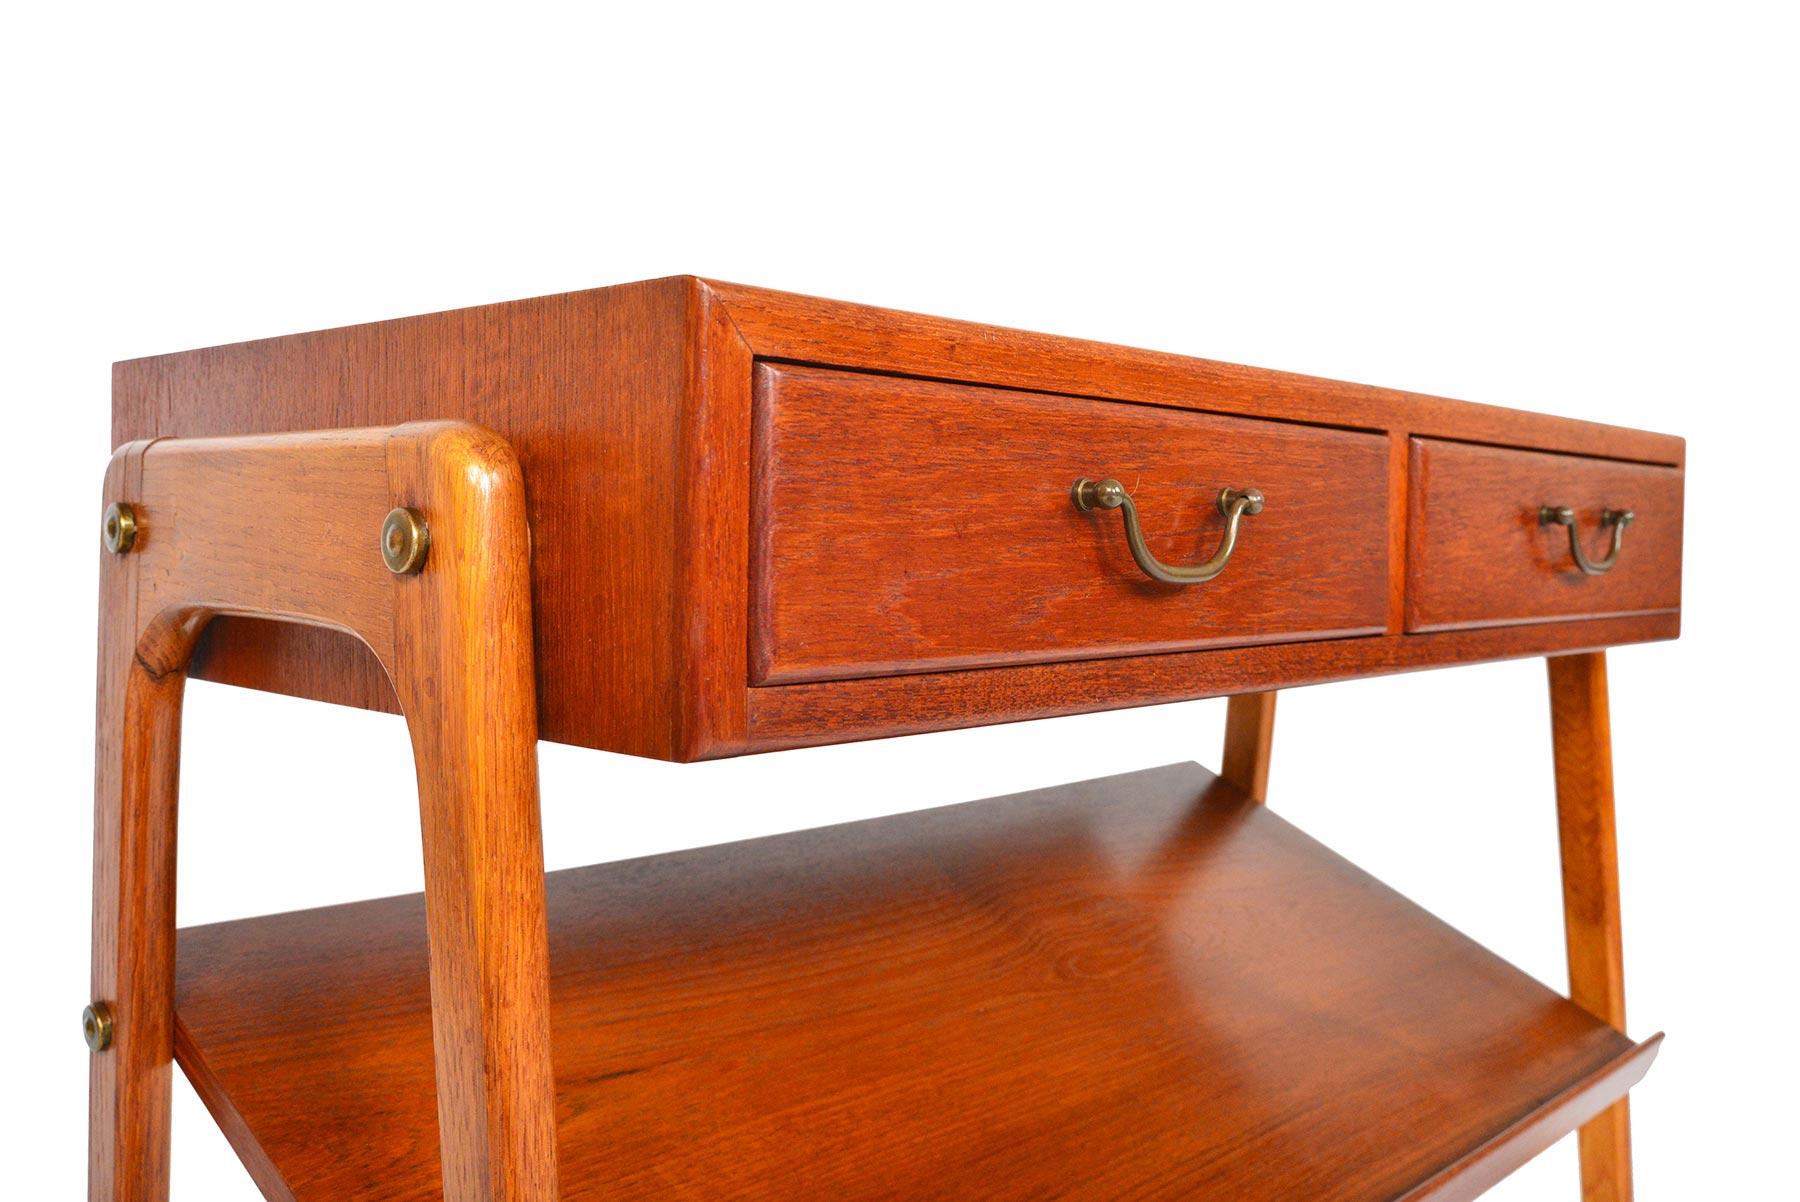 This Danish modern midcentury hallway chest with magazine rack is crafted in teak and oak. The beautifully cornered case holds two drawers with patinated brass pulls. The exterior mounted oak base supports the case and a canted rack perfect for